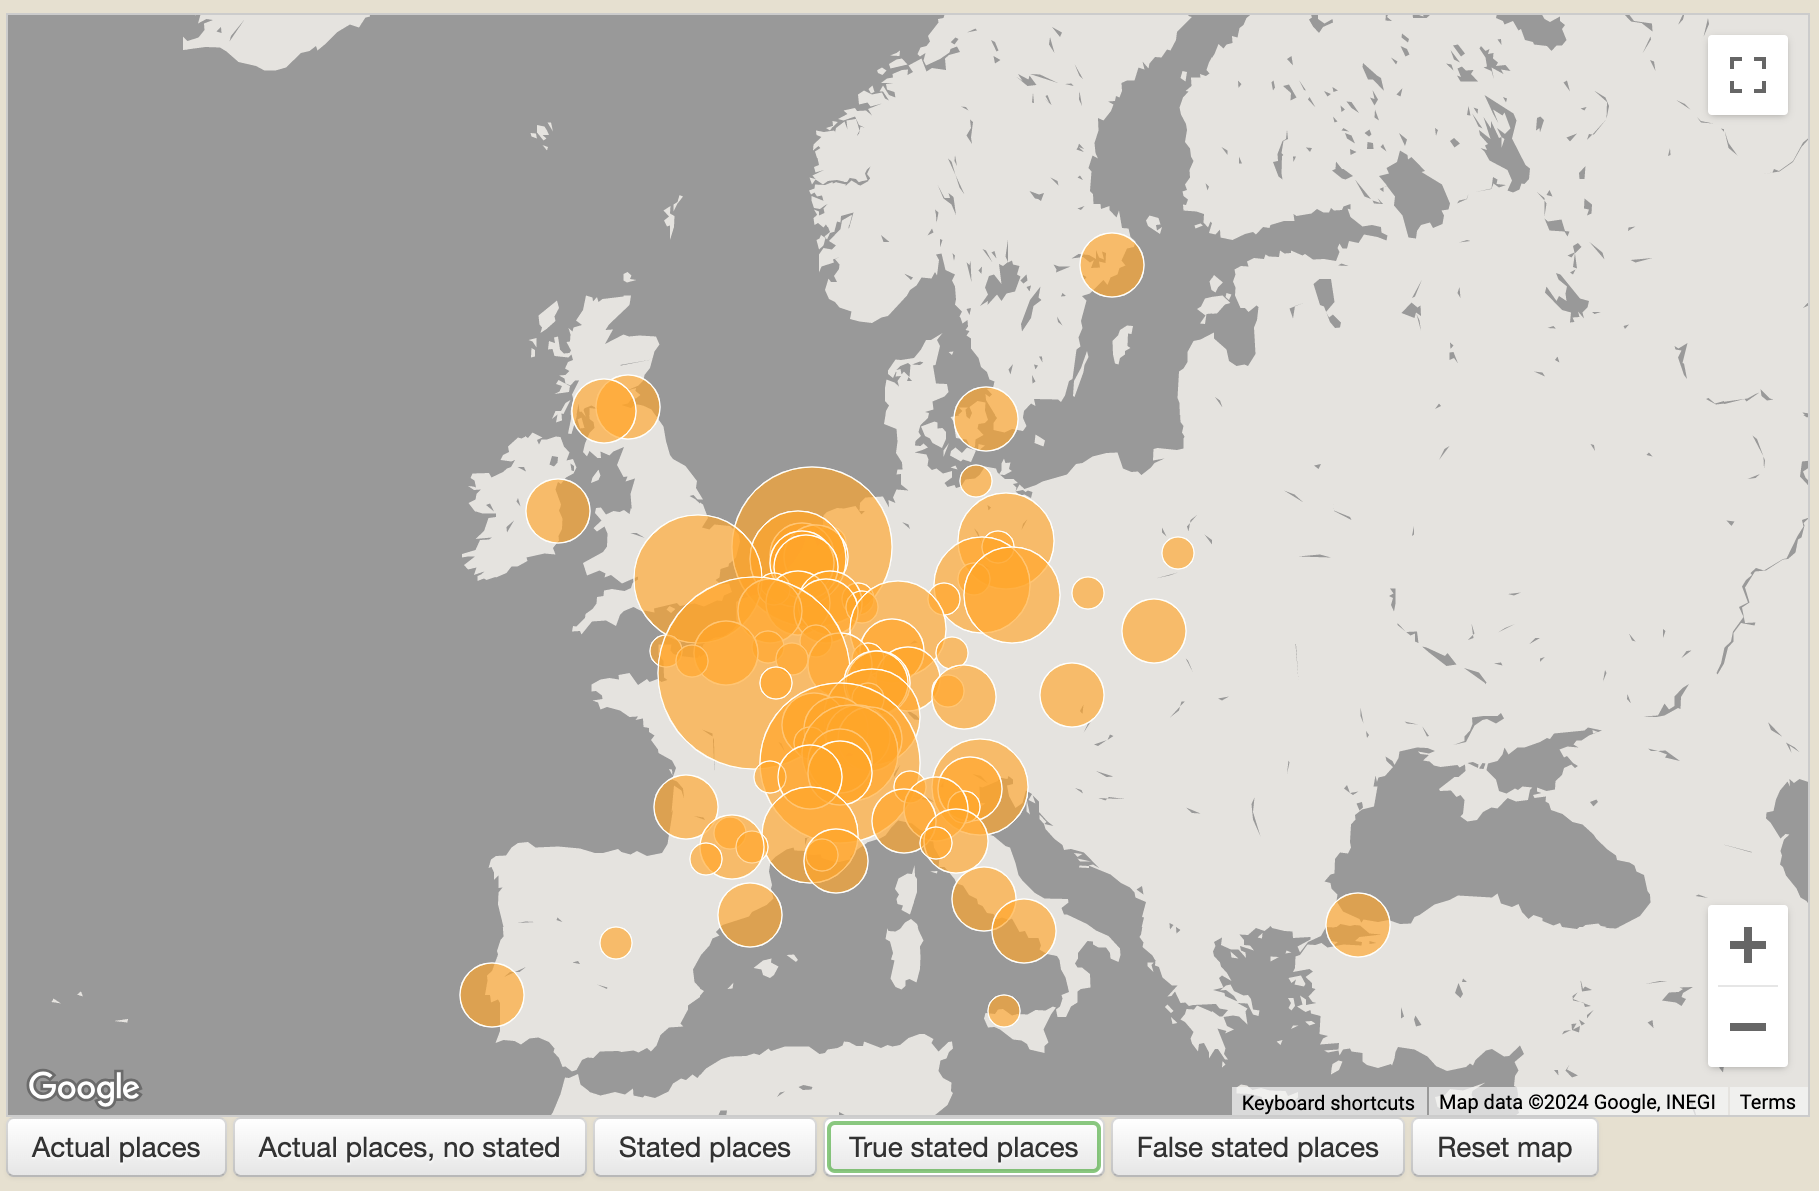 Map showing various sized orange circles over europe, indicating locations related to 